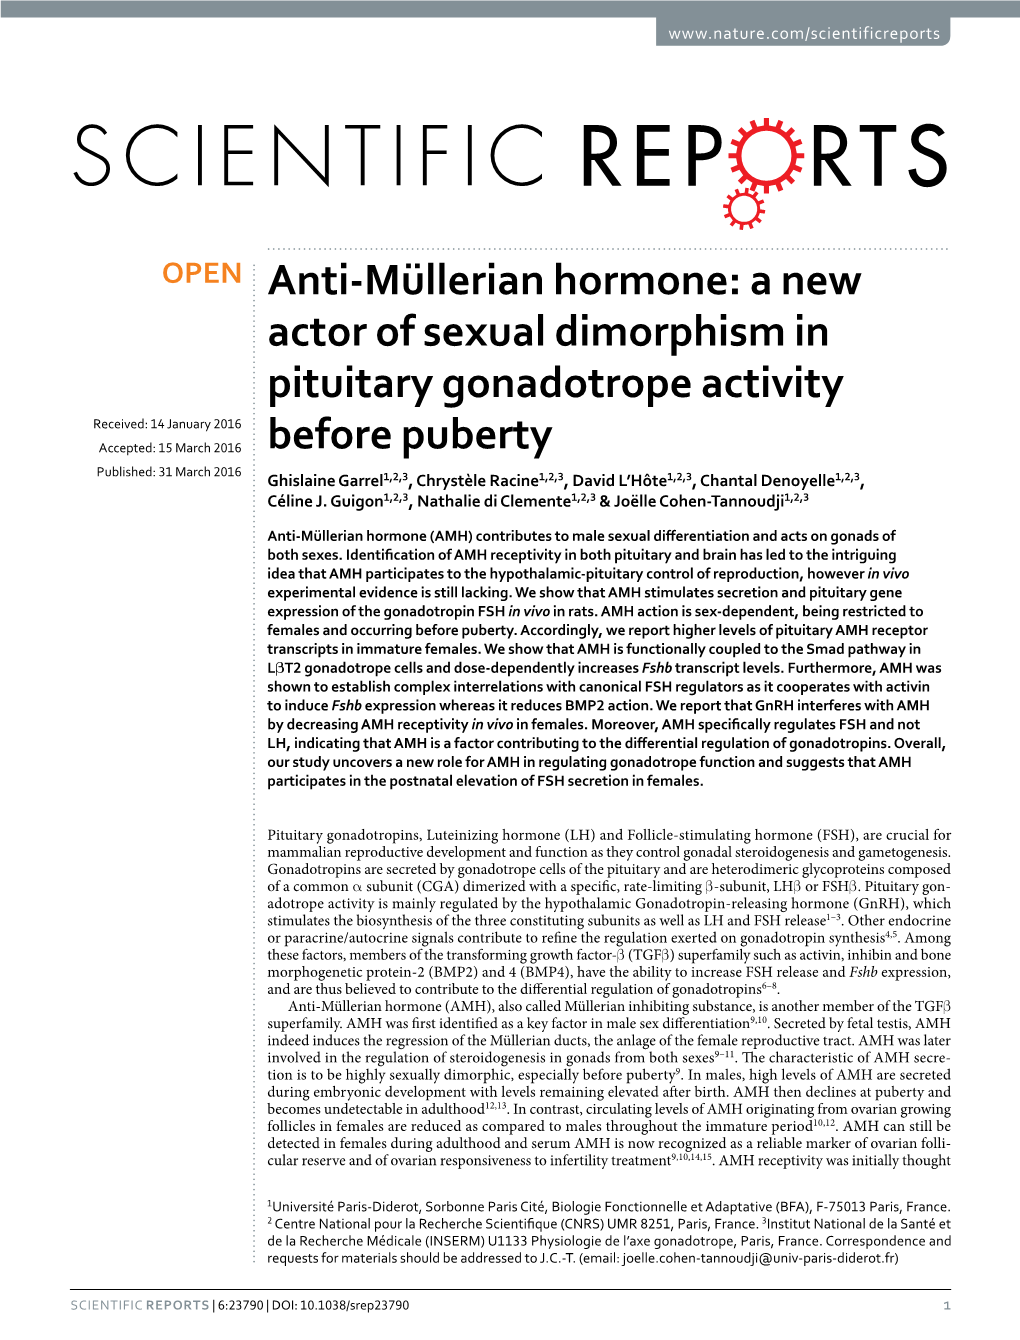 A New Actor of Sexual Dimorphism in Pituitary Gonadotrope Activity Before Puberty